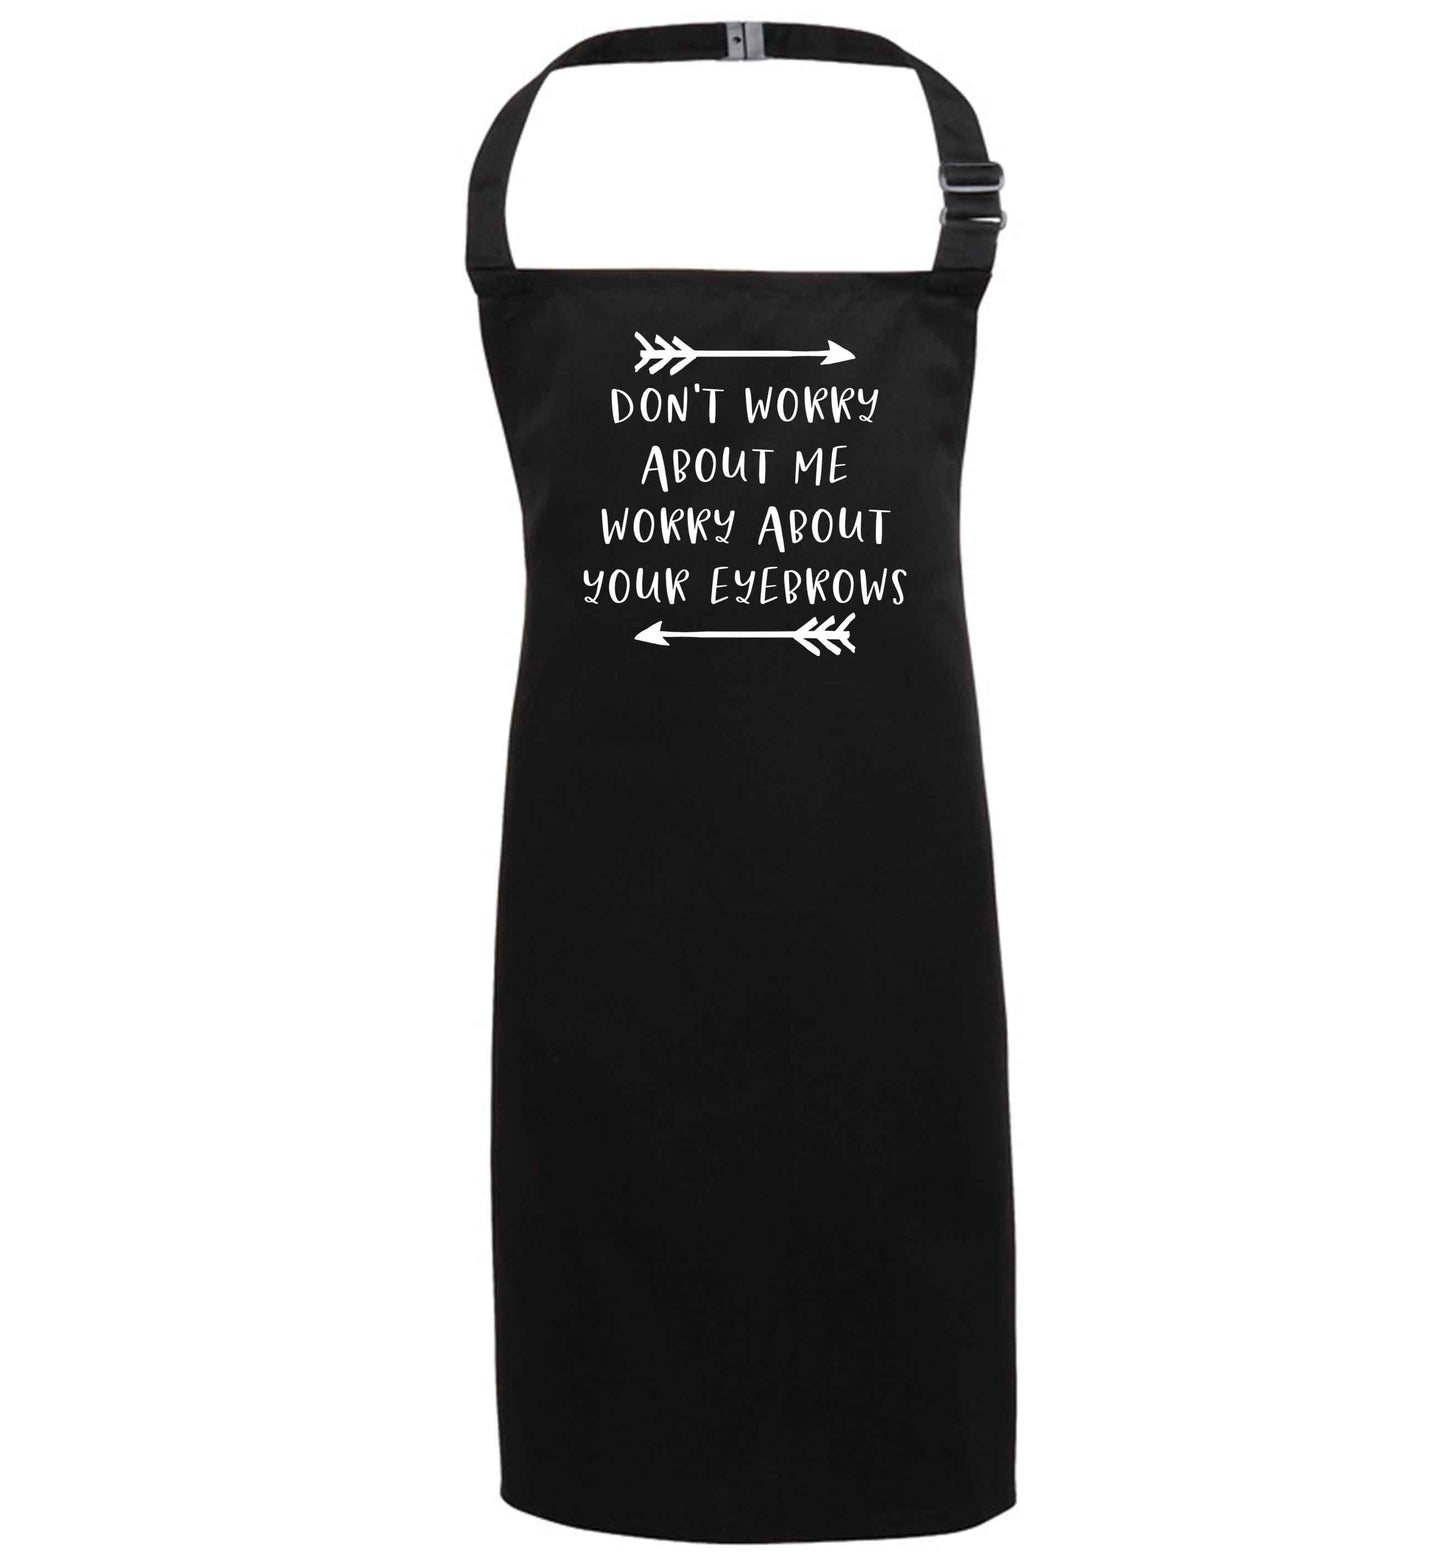 Don't worry about me worry about your eyebrows black apron 7-10 years